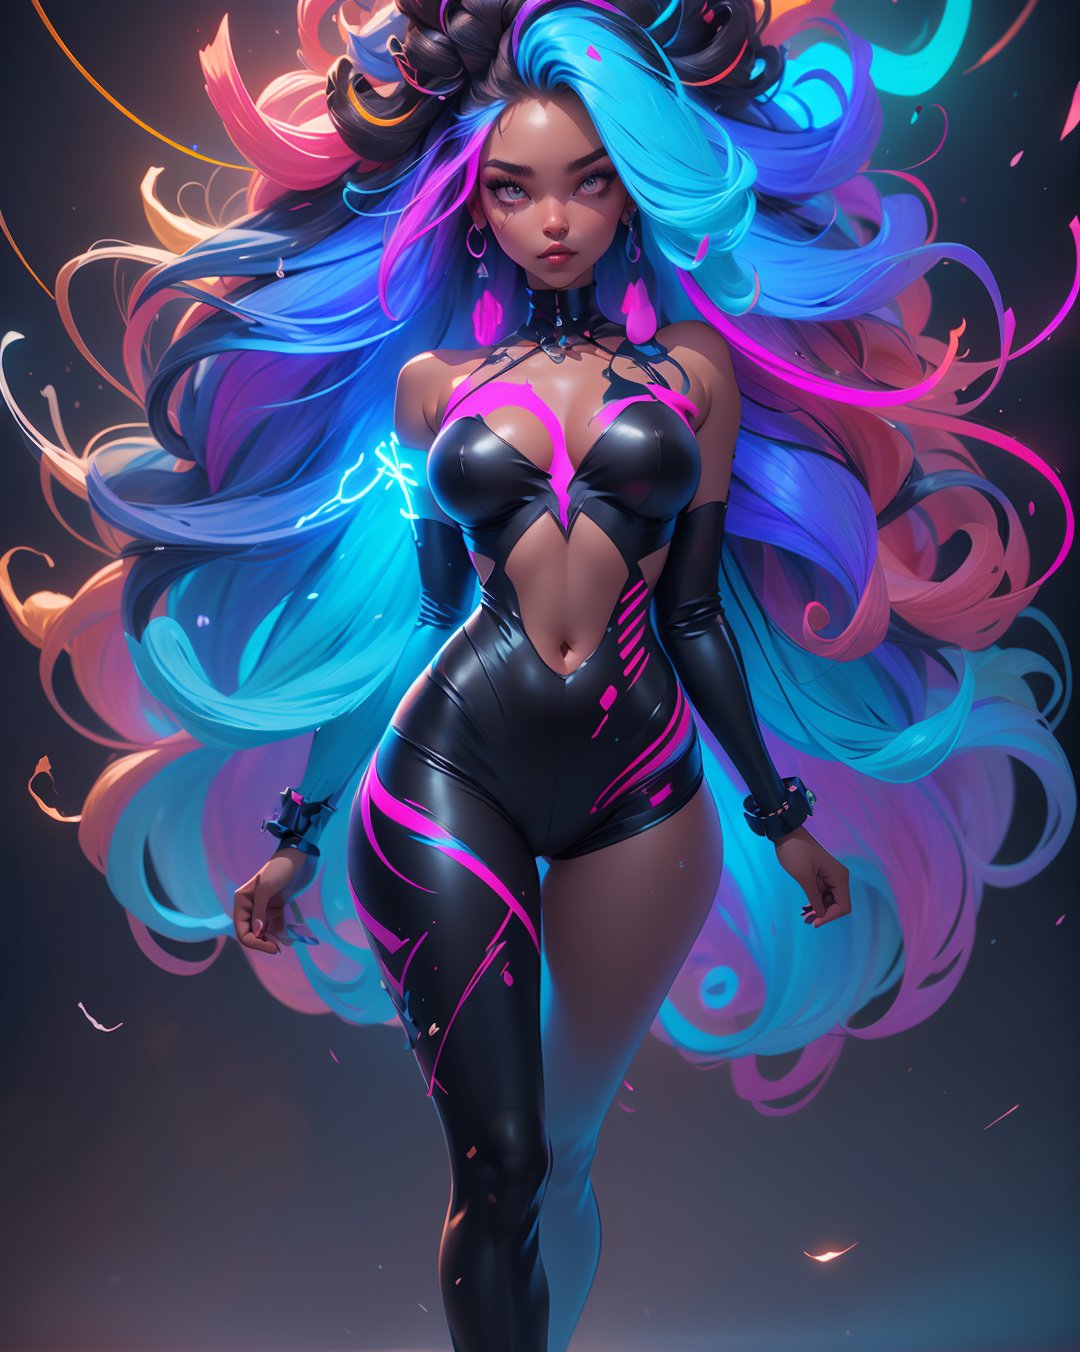 1 girl, full body, symmetrical face, perfect brown eyes, smoke, sparks, (female hair made of fine multicolored neon curls:1.5), (long thin hair made of multicolored neon strands flowing down the body), smoky skin, mixture of hip-hop style and realism, ultra high resolution, 8k, HDr, art, high detail, , art